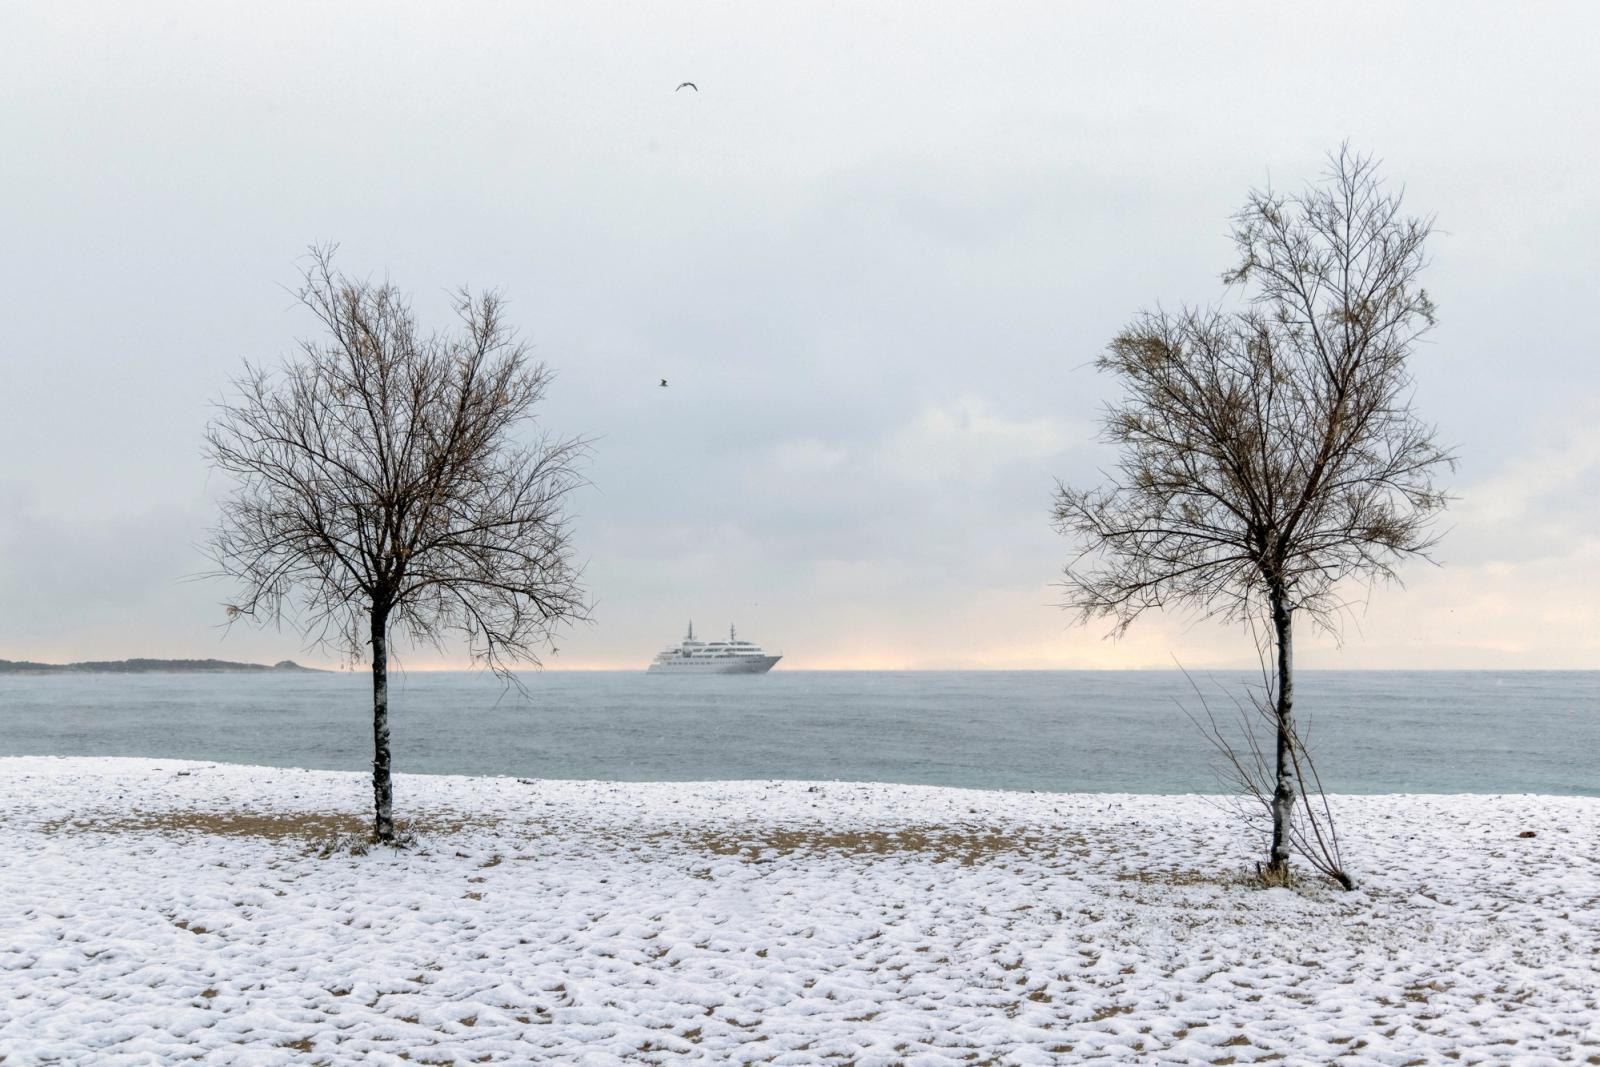 Snows covers a beach in Glyfada suburb, as a cruise ship sails in the background, during snowfall in Athens, Greece, February 6, 2023.